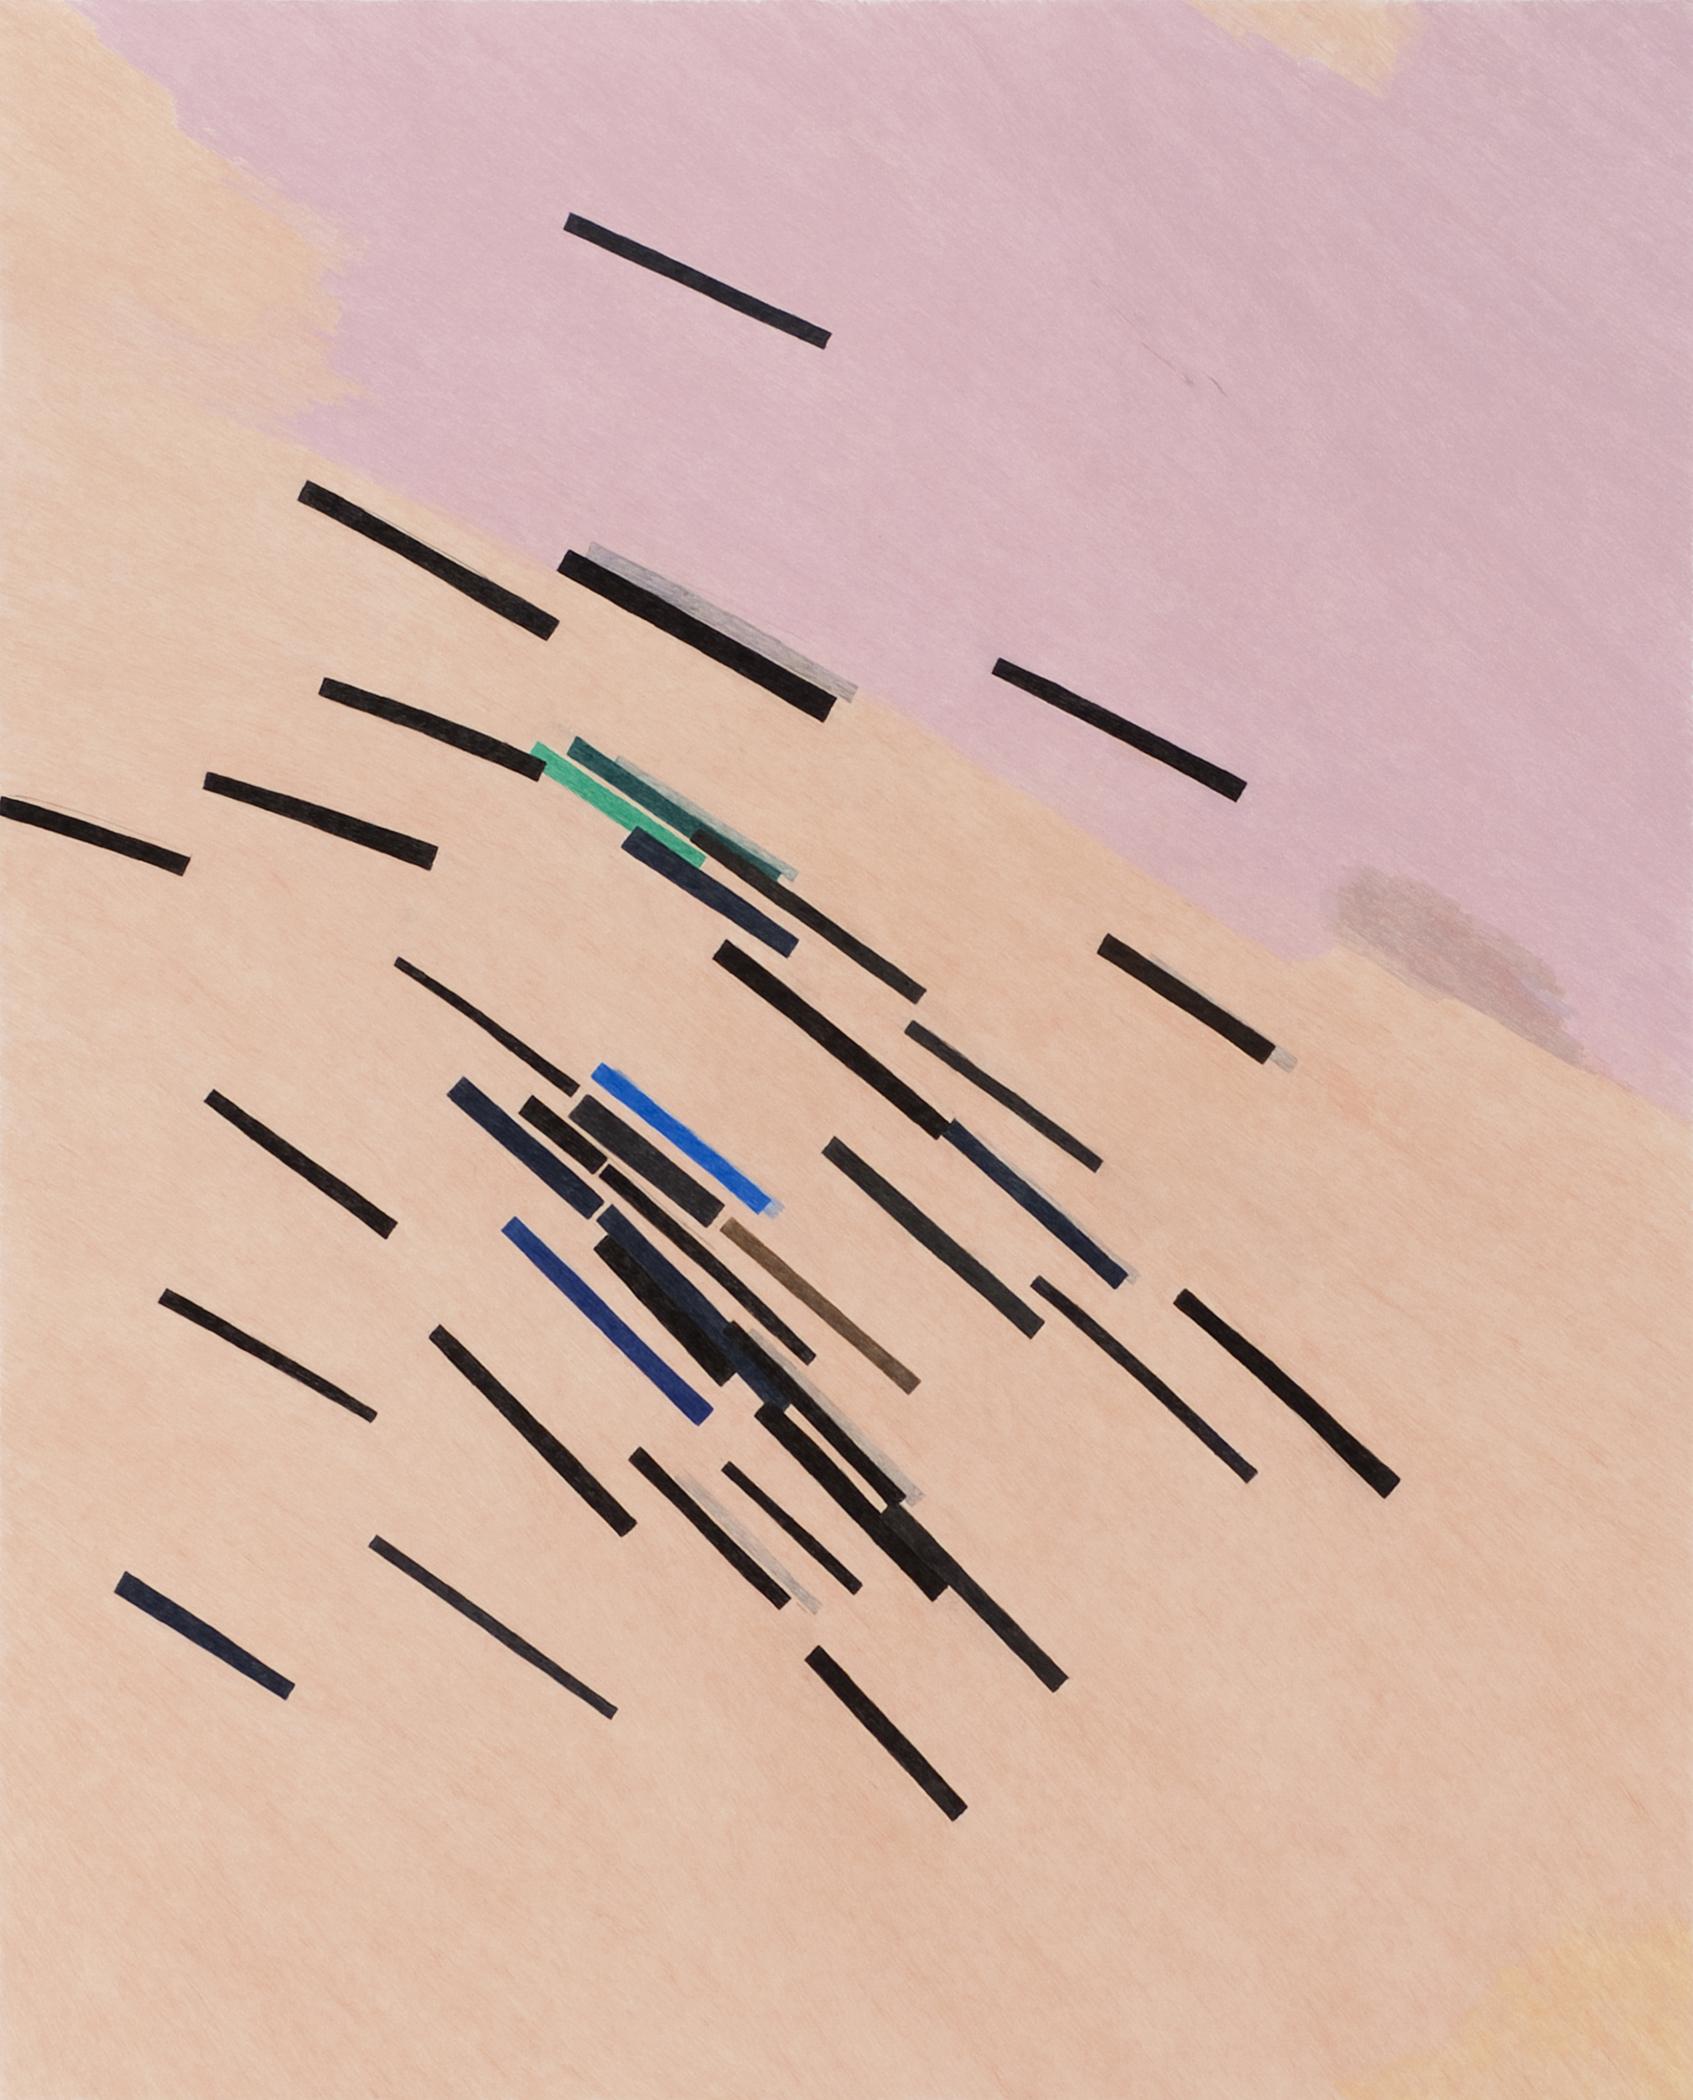 A drawing shows several short lines in the colors black, blue, green, and brown on a pale orange and pale pink background.